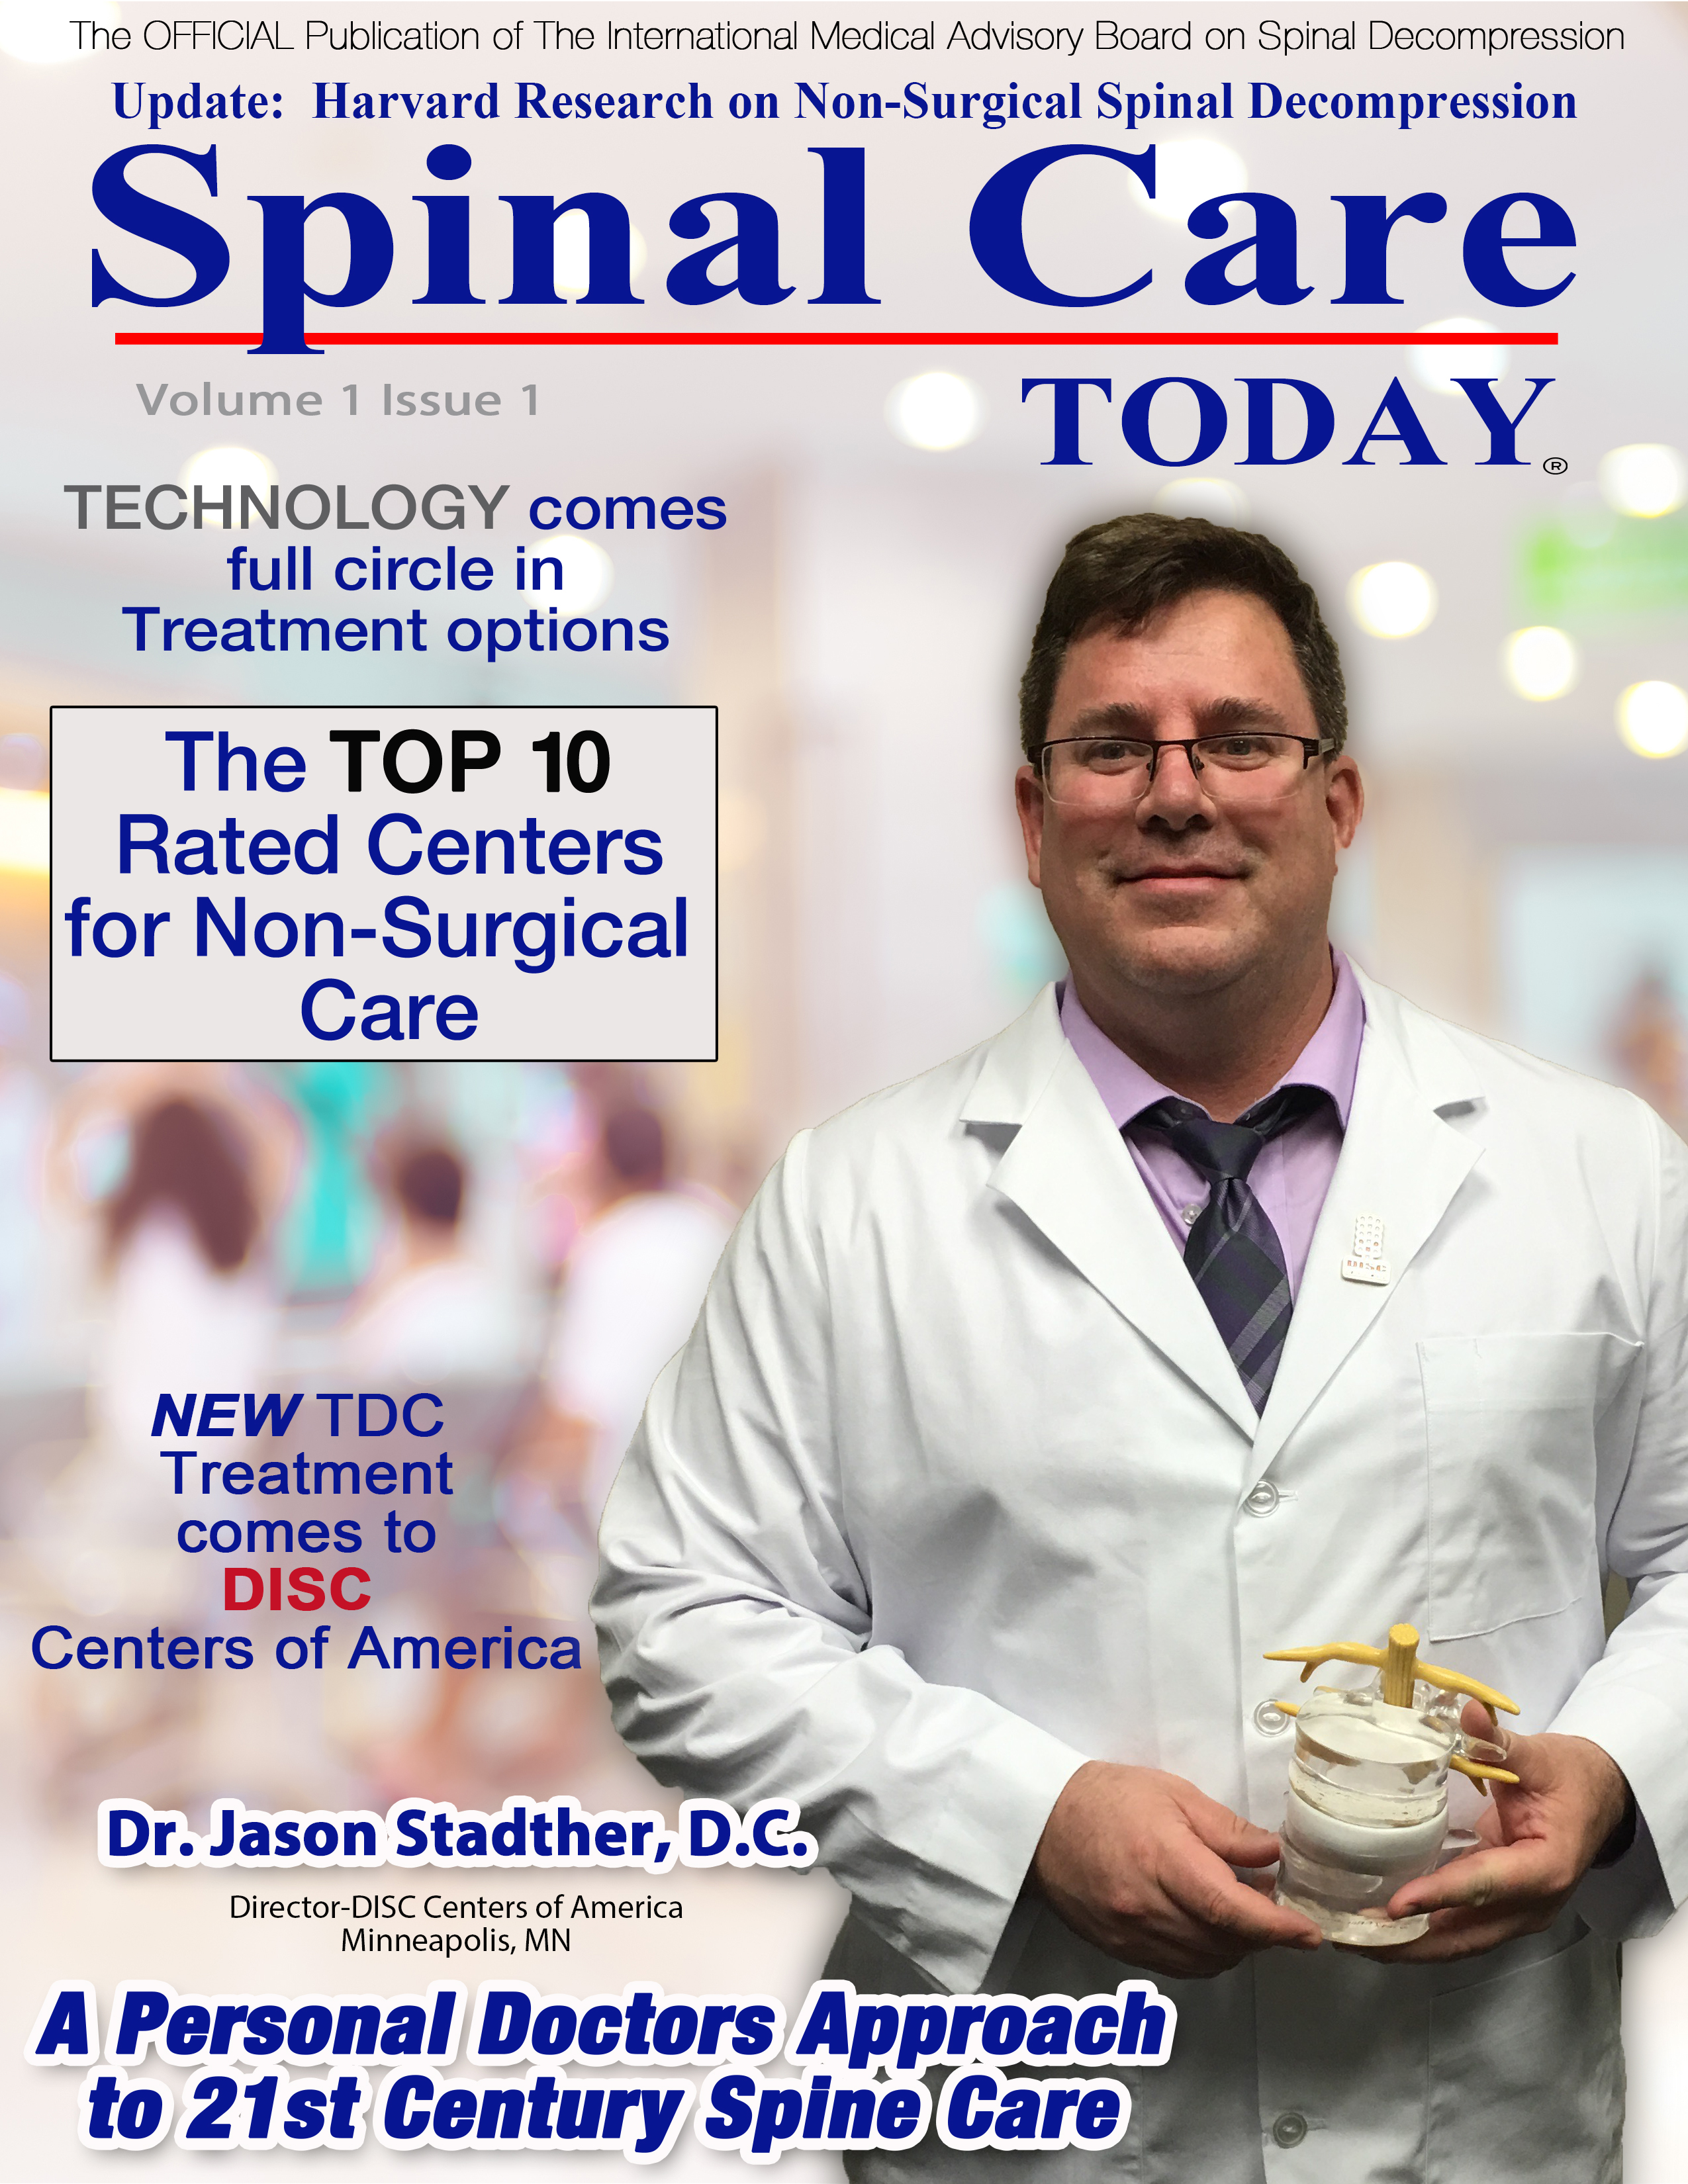 Jason Stadther DC Magazine Cover - Spinal Care Today - Disc Centers of America